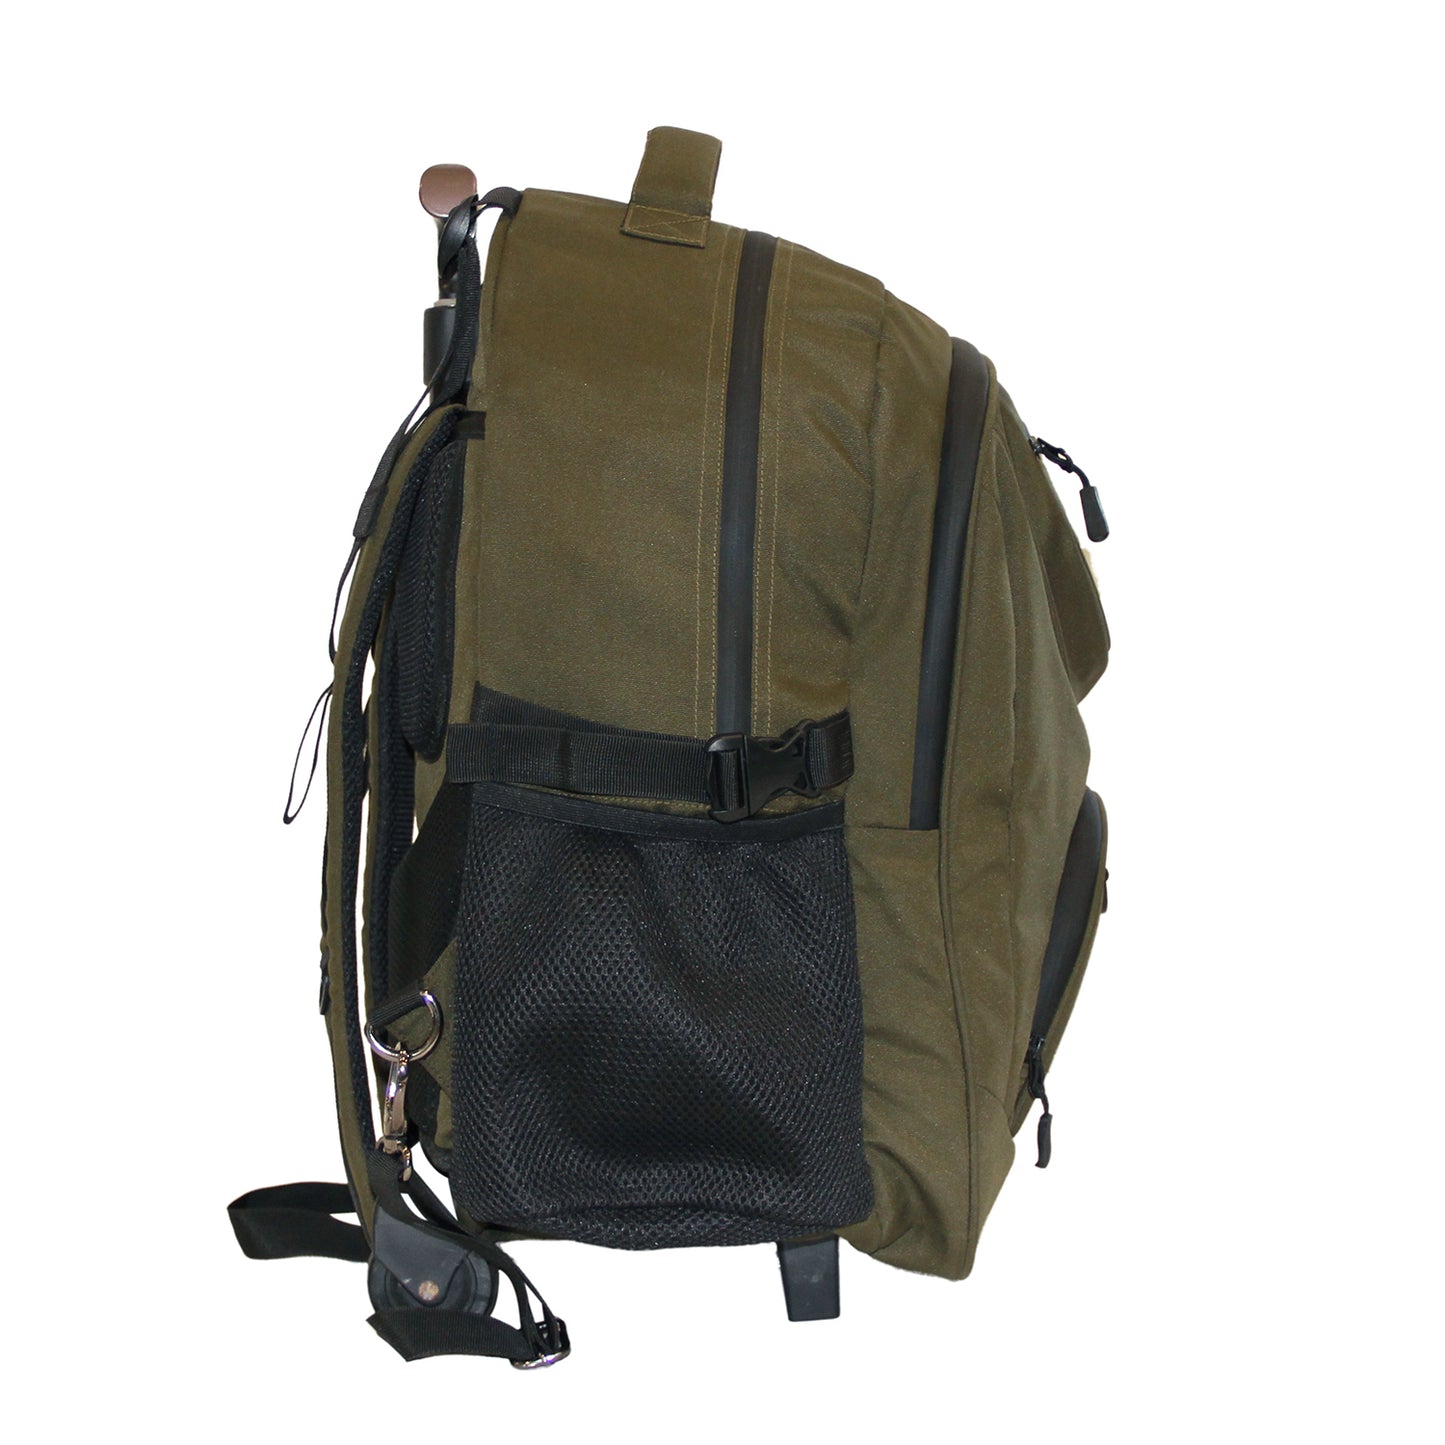 Heavy Duty Backpack with Trolley